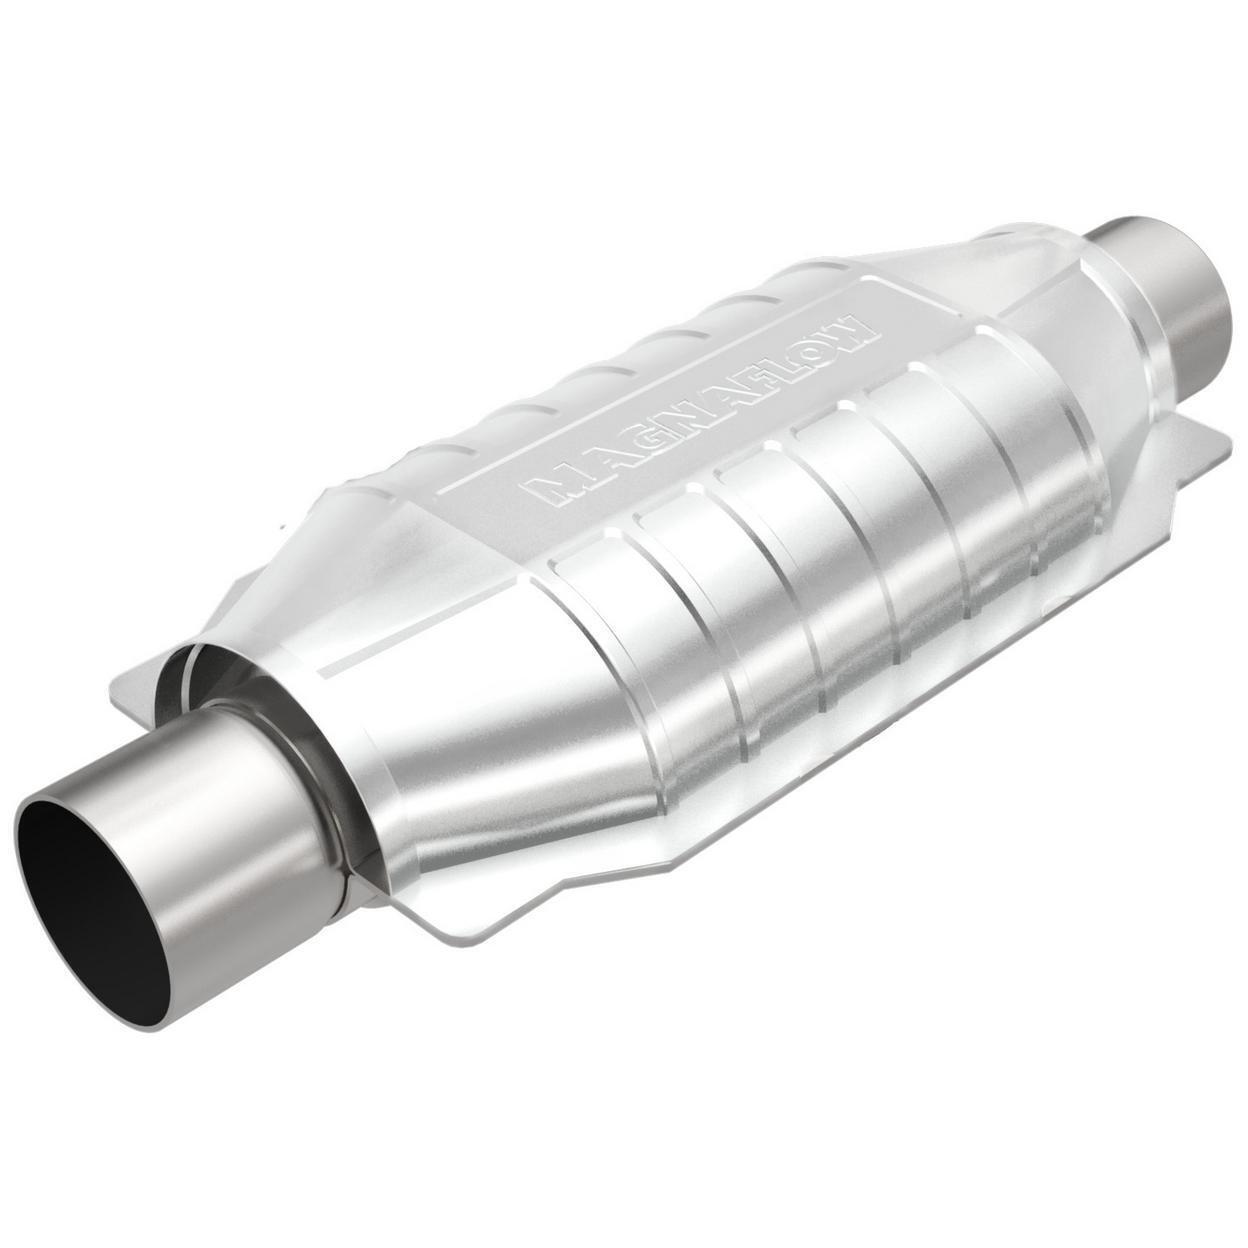 Magnaflow Catalytic Converter for 1993 Jeep Grand Wagoneer